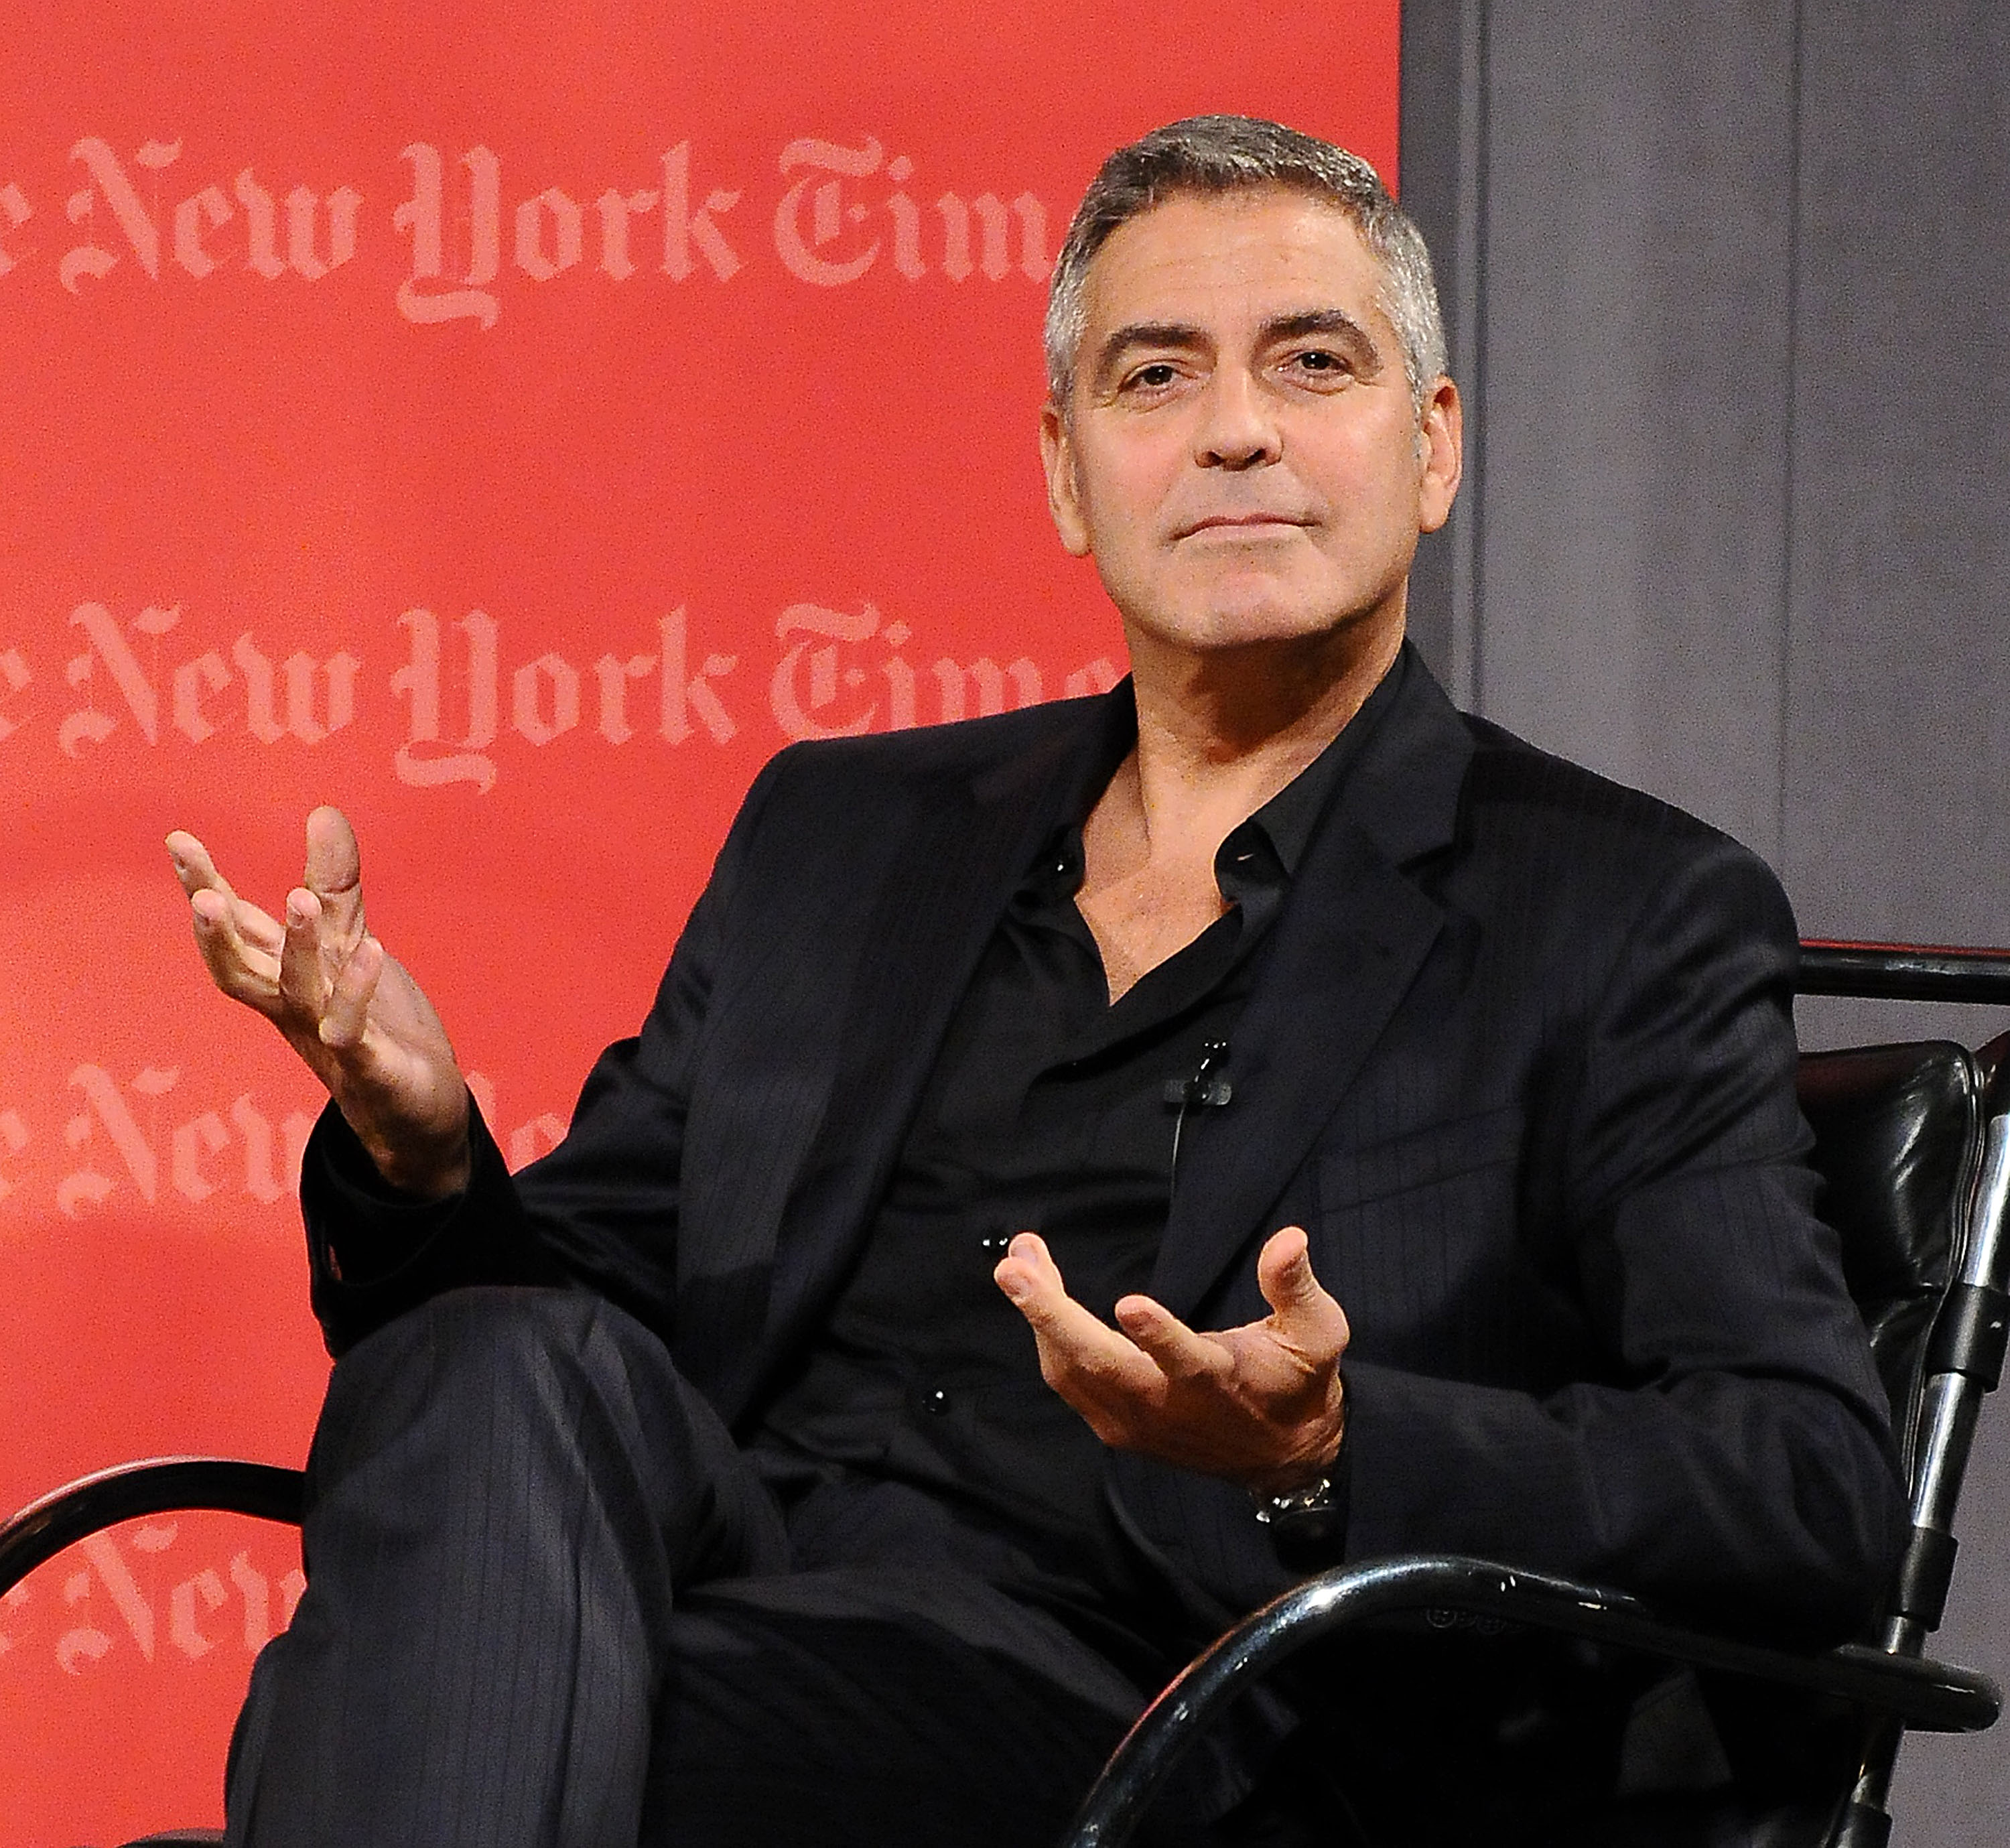 Actor George Clooney at the West Coast TimesTalks at SilverScreen Theater at the Pacific Design Center on February 8, 2012, in West Hollywood, California. | Source: Getty Images